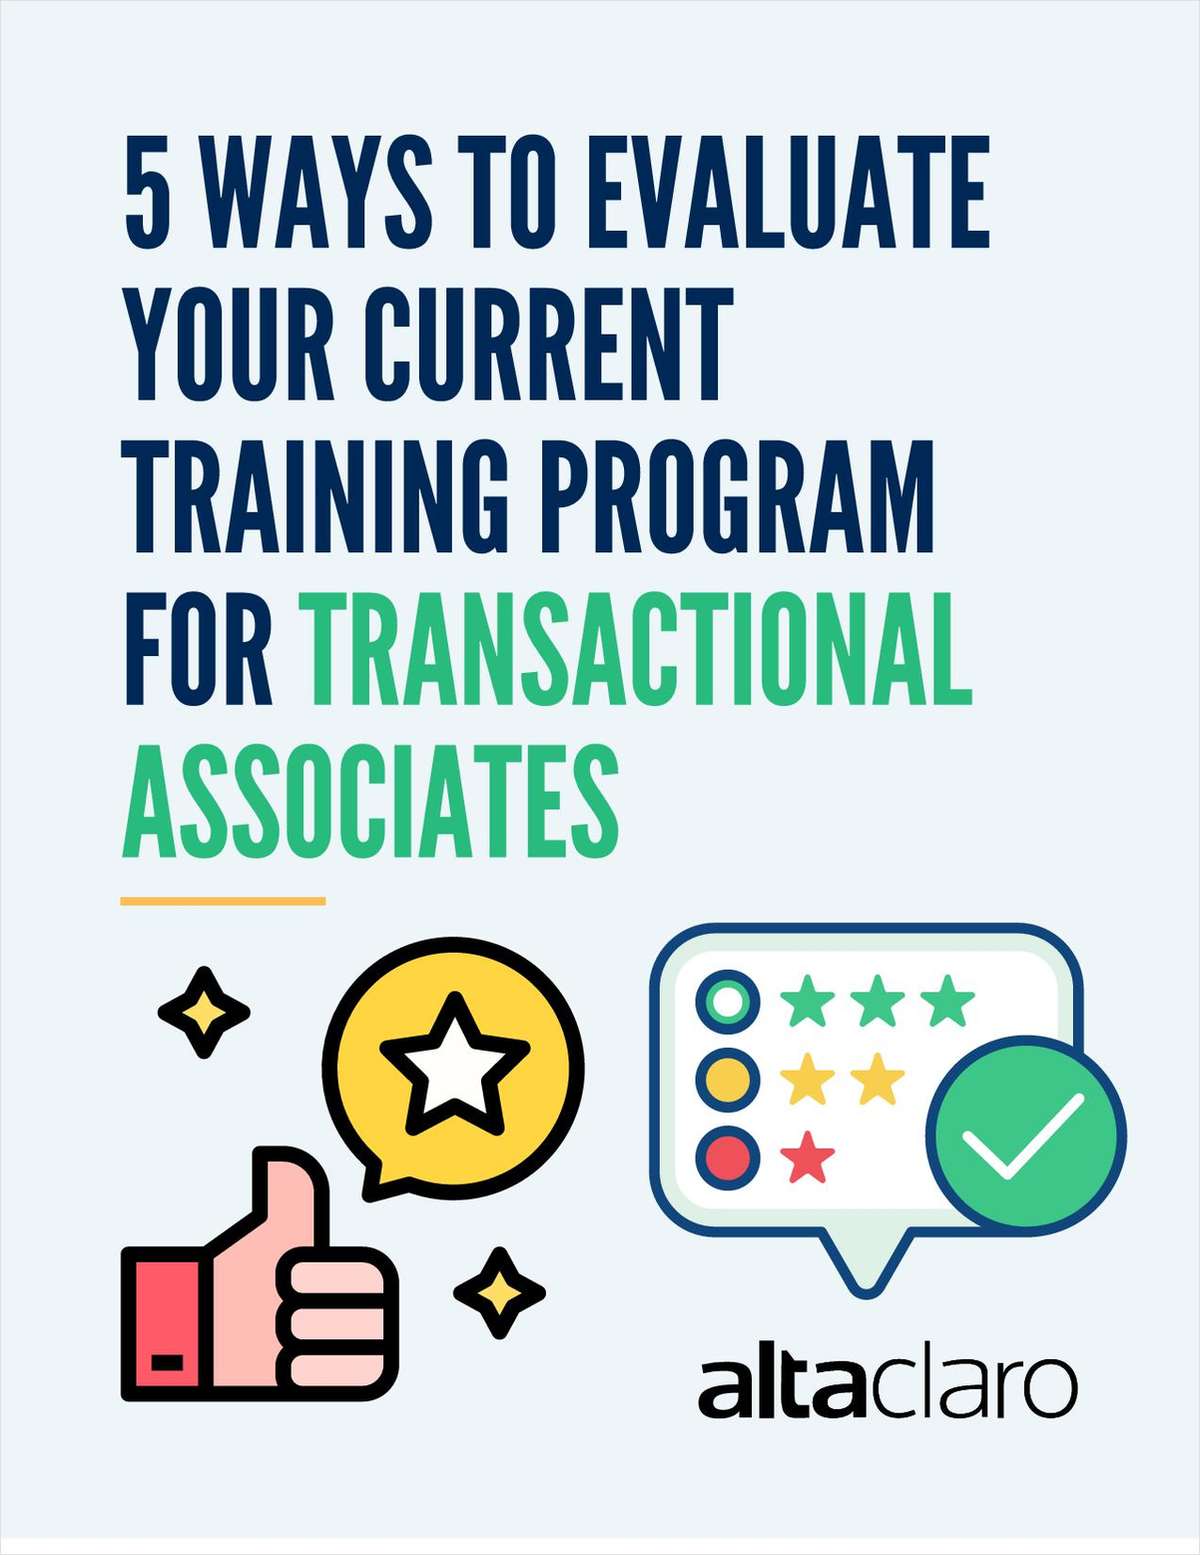 In this guide, you’ll learn five ways you can evaluate your current training program for transactional associates so you can ensure your new employees always hit the ground running.